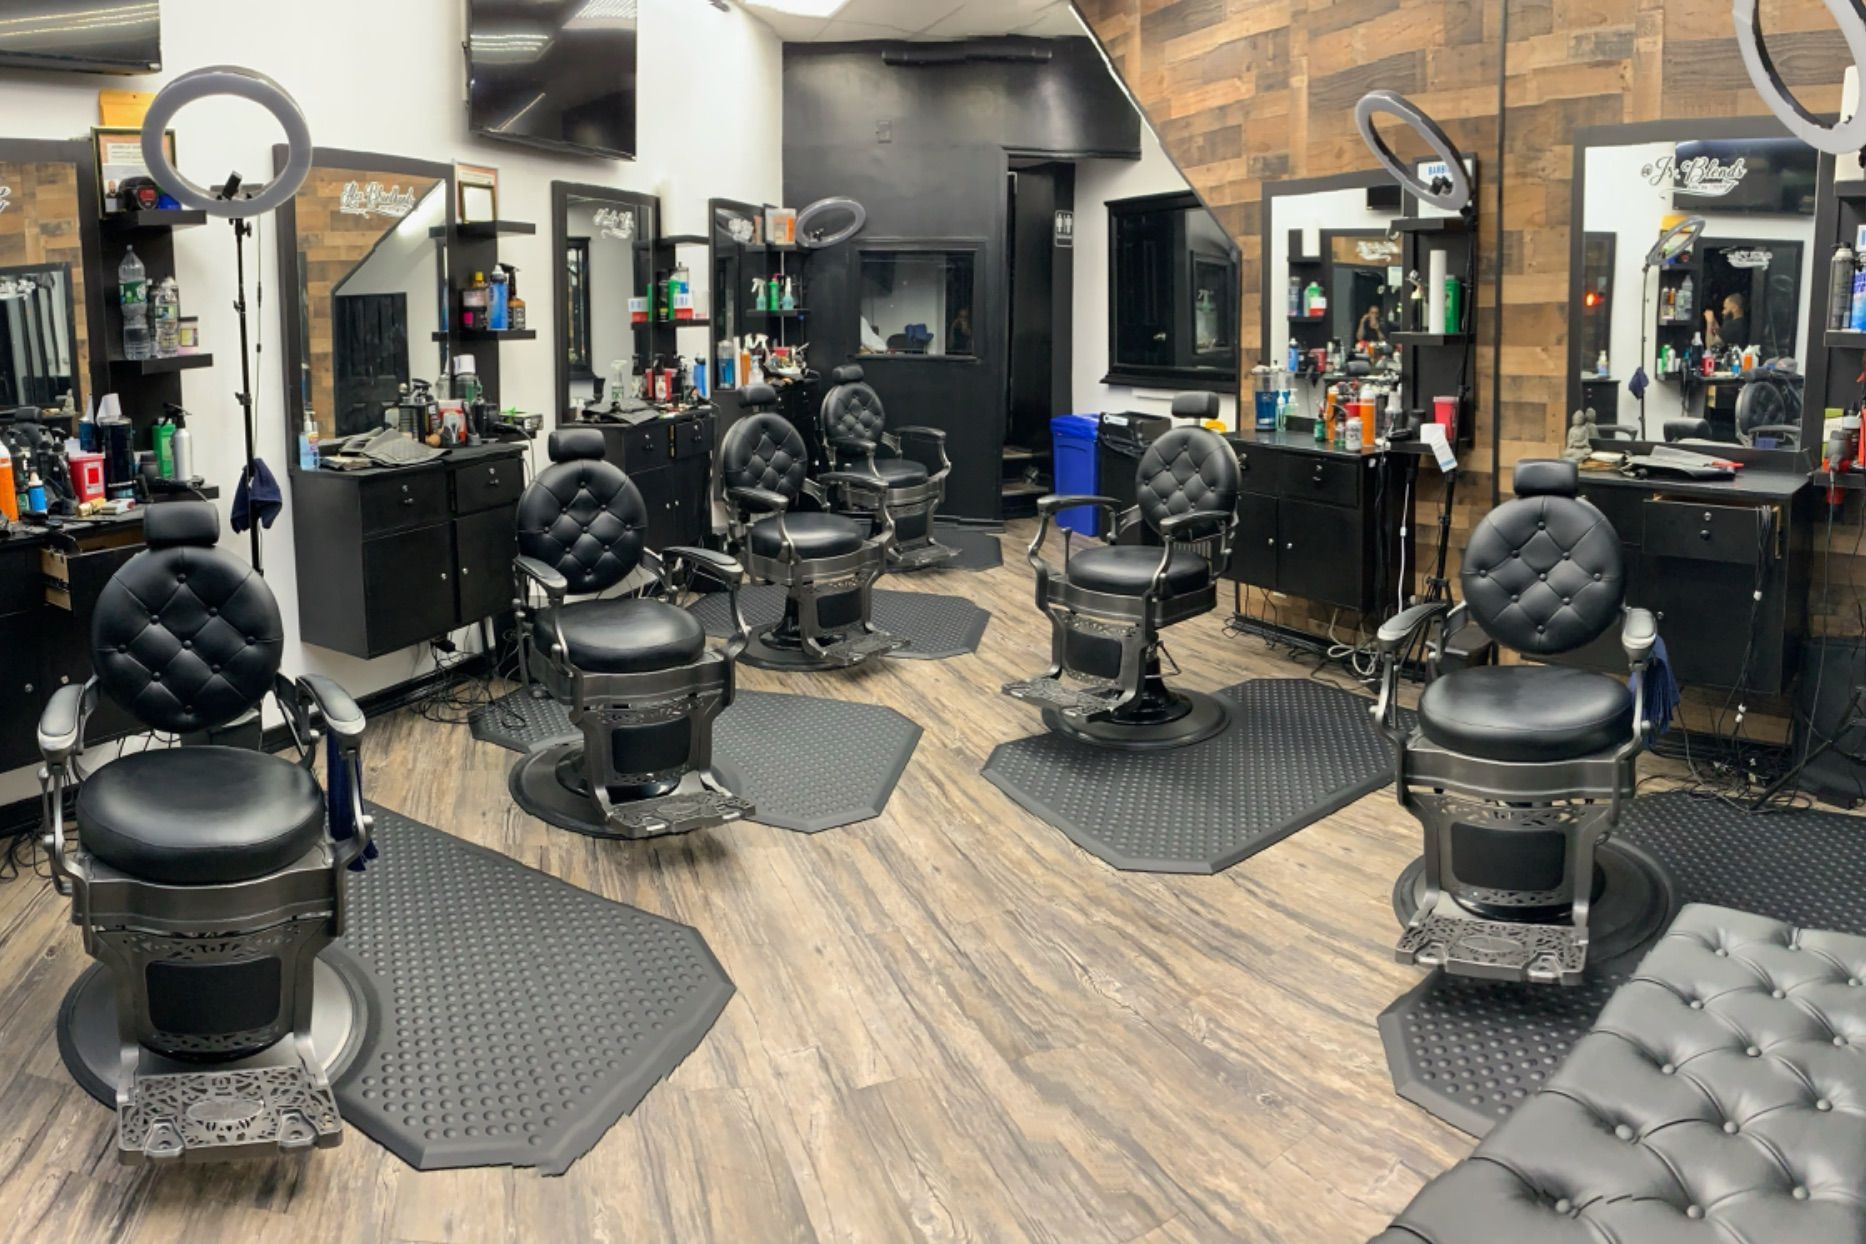 Barber Chairs & Barber Supplies (@jjbarbersupplyco) • Instagram photos and  videos